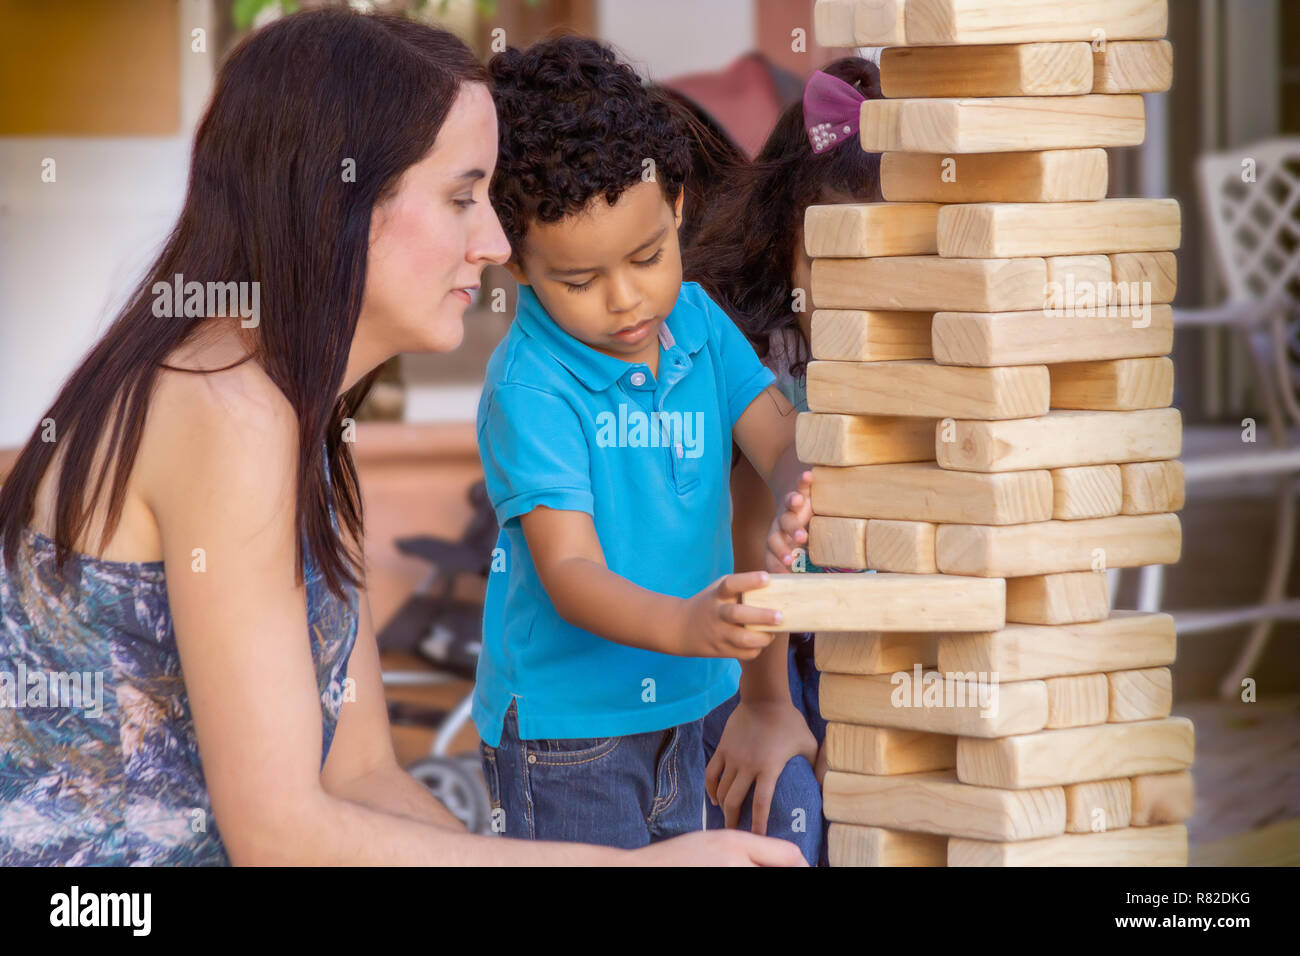 The wooden large size jumbling tower holds steady while the boy keeps it in place with one hand removing a block with the other while Mom is watching. Stock Photo